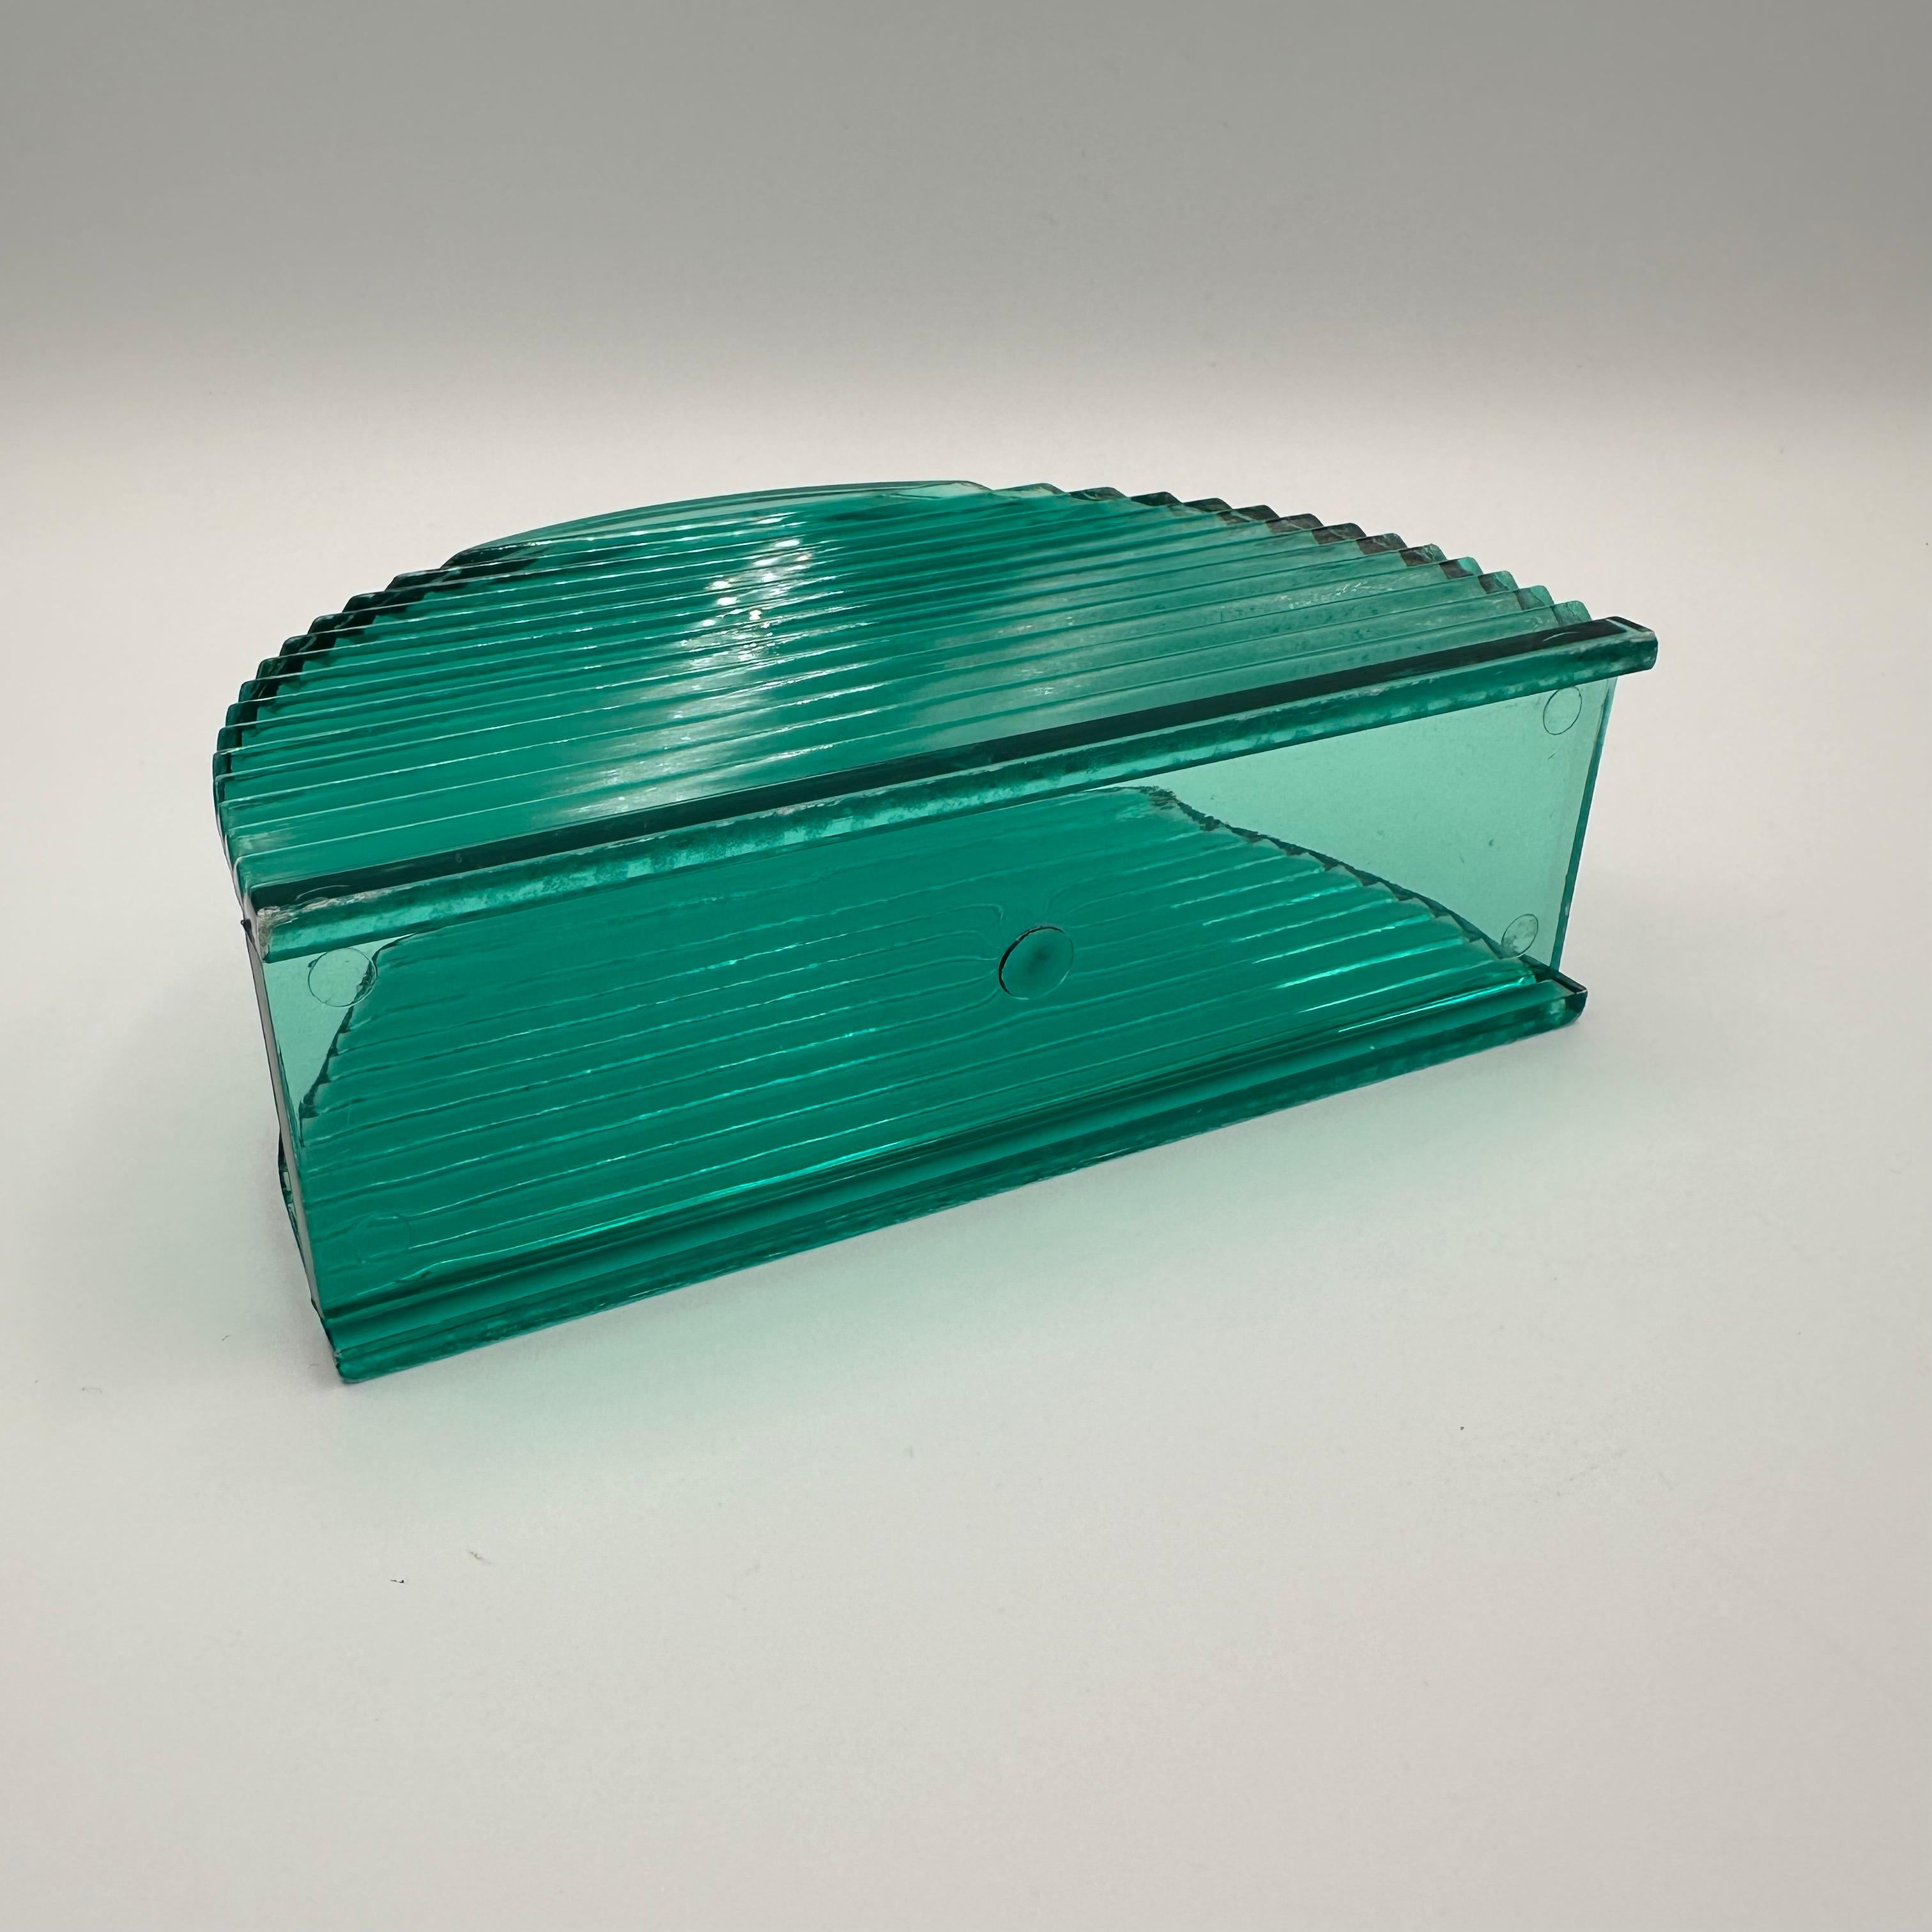 Late 20th Century Vintage Post Modern Half Moon Shaped Teal Lucite Napkin Holder For Sale